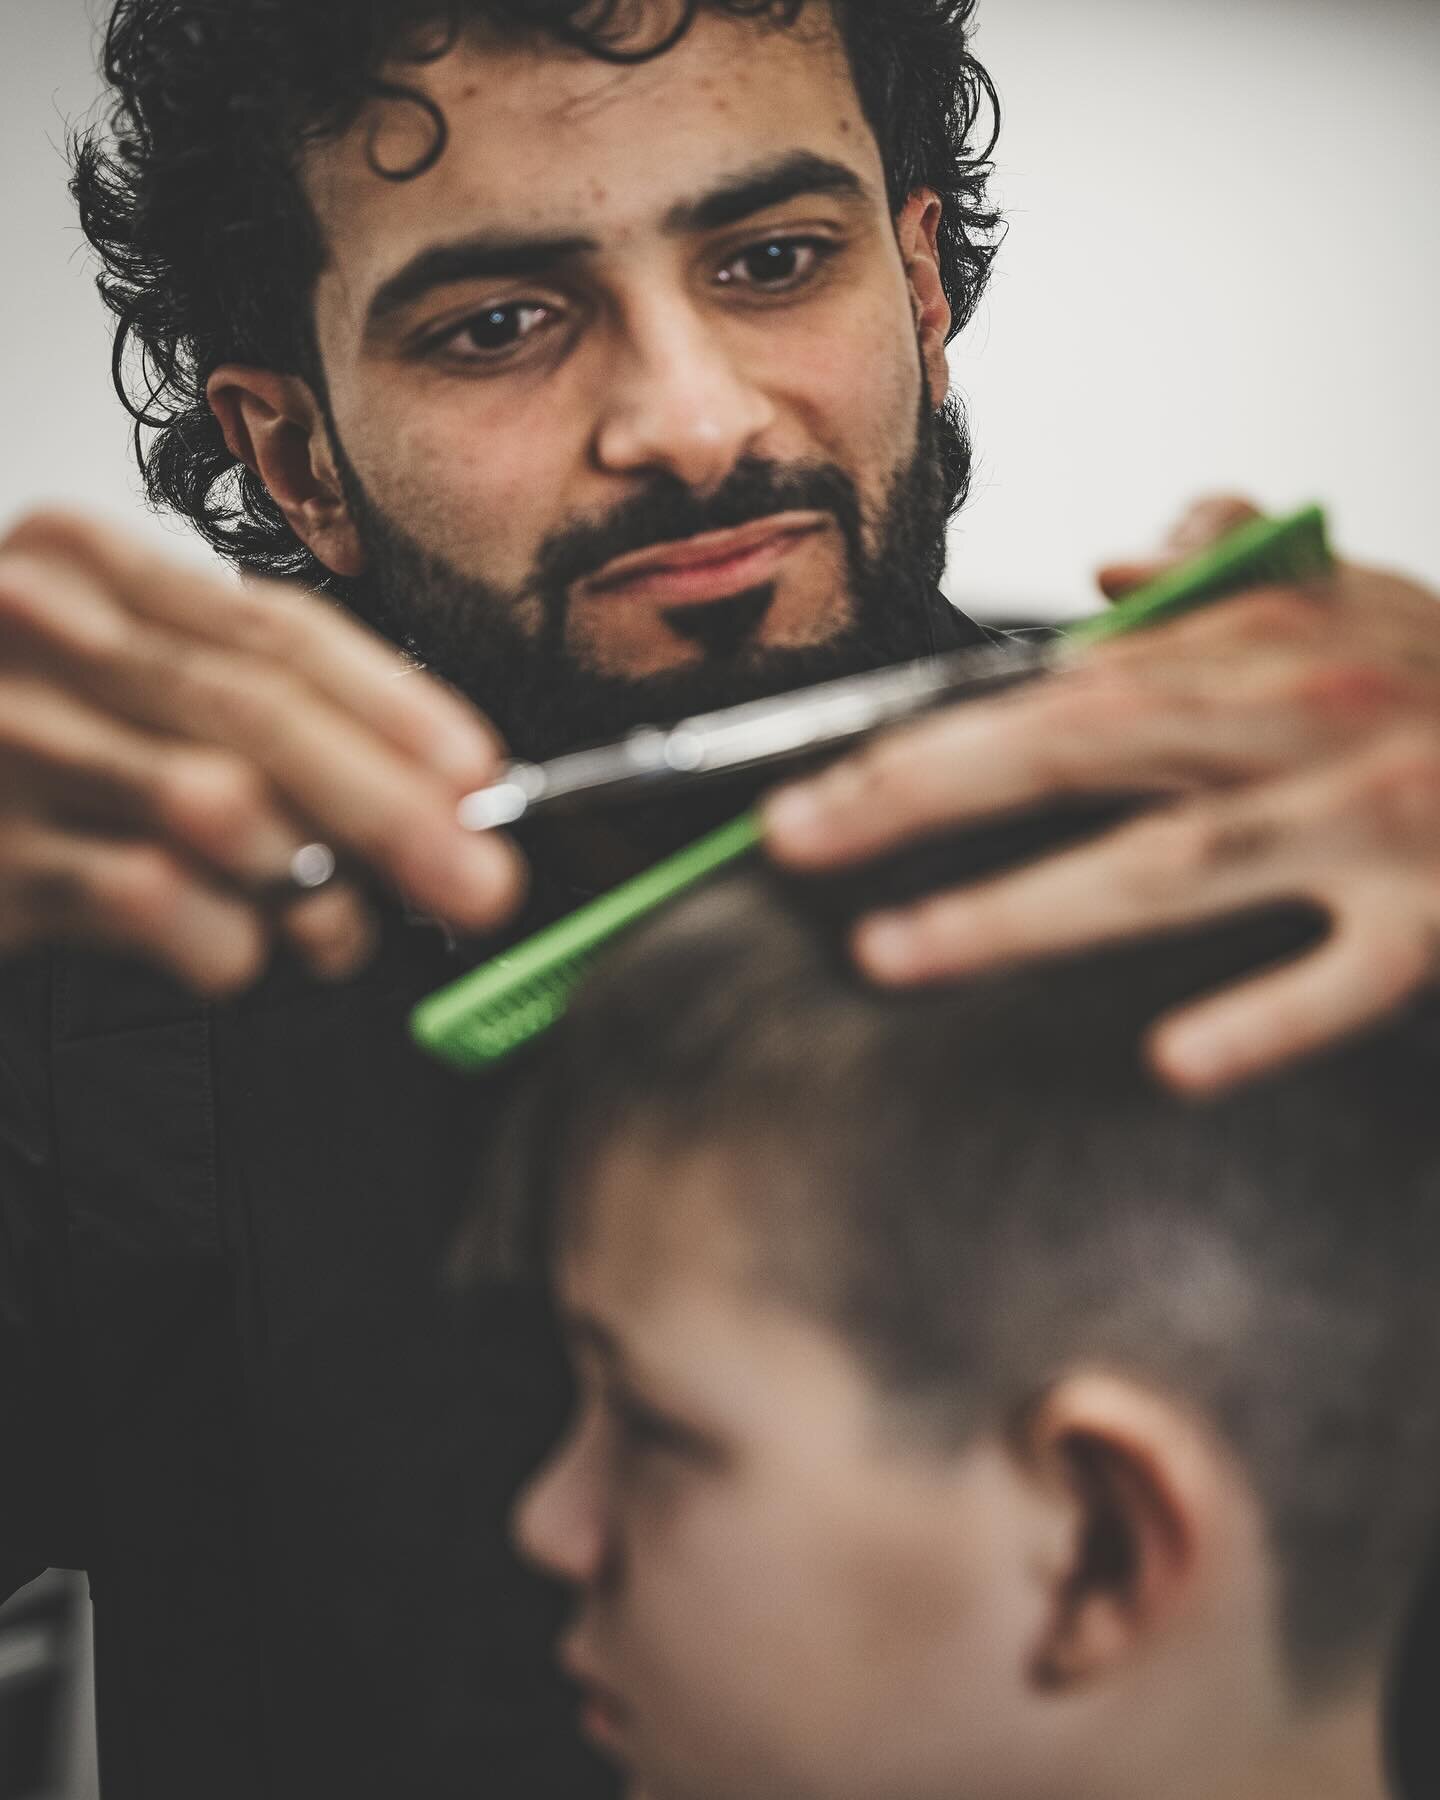 ✂️🖼️ The Art of a Haircut: Discovering Passion and Community at Momo&rsquo;s Fades 🖼️✂️

📸 Chilliwack Photo Stories - Spotlight on Local Gems 🌟

Step into Momo&rsquo;s Fades Barbershop, and you&rsquo;ll feel it right away &ndash; the warmth of ge